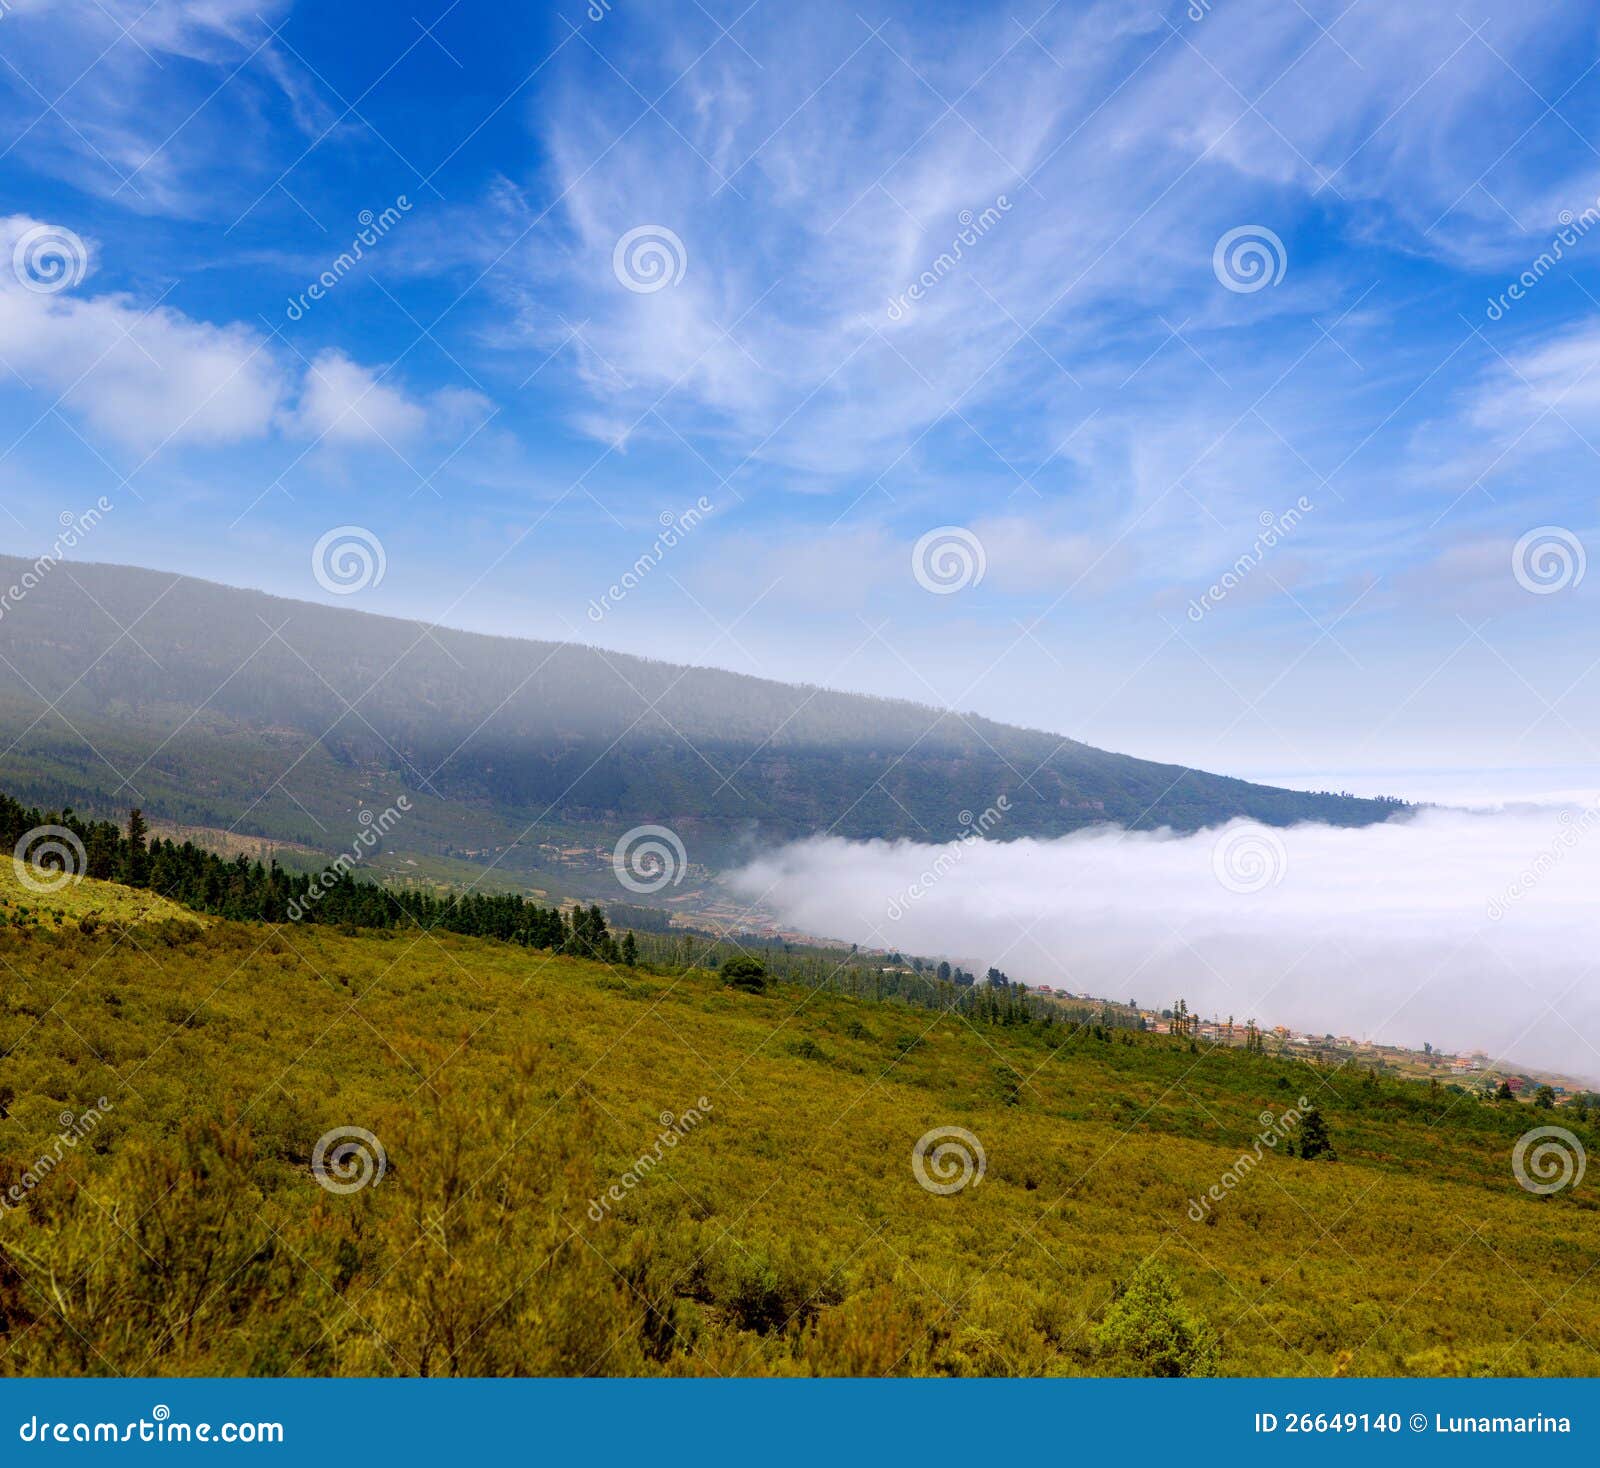 orotava valley with sea of clouds in tenerife mountain